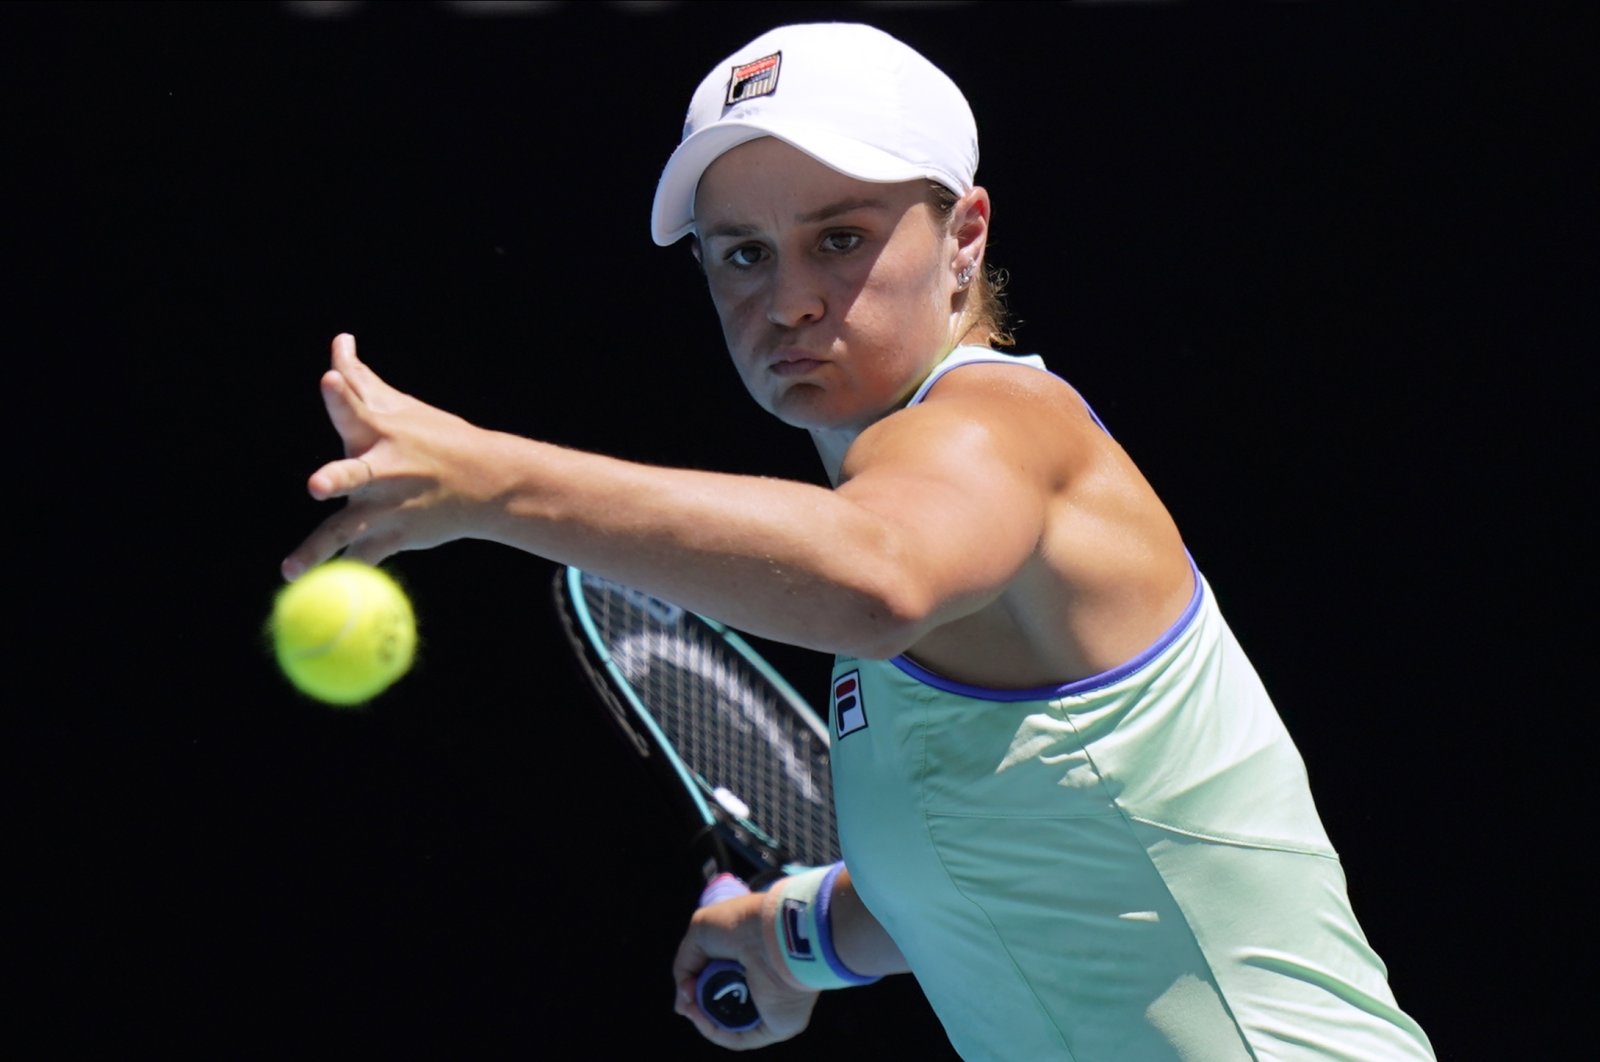 Ashleigh Barty in action during an Australian Open semifinal match, in Melbourne, Australia, Jan. 30, 2020. (AP Photo)